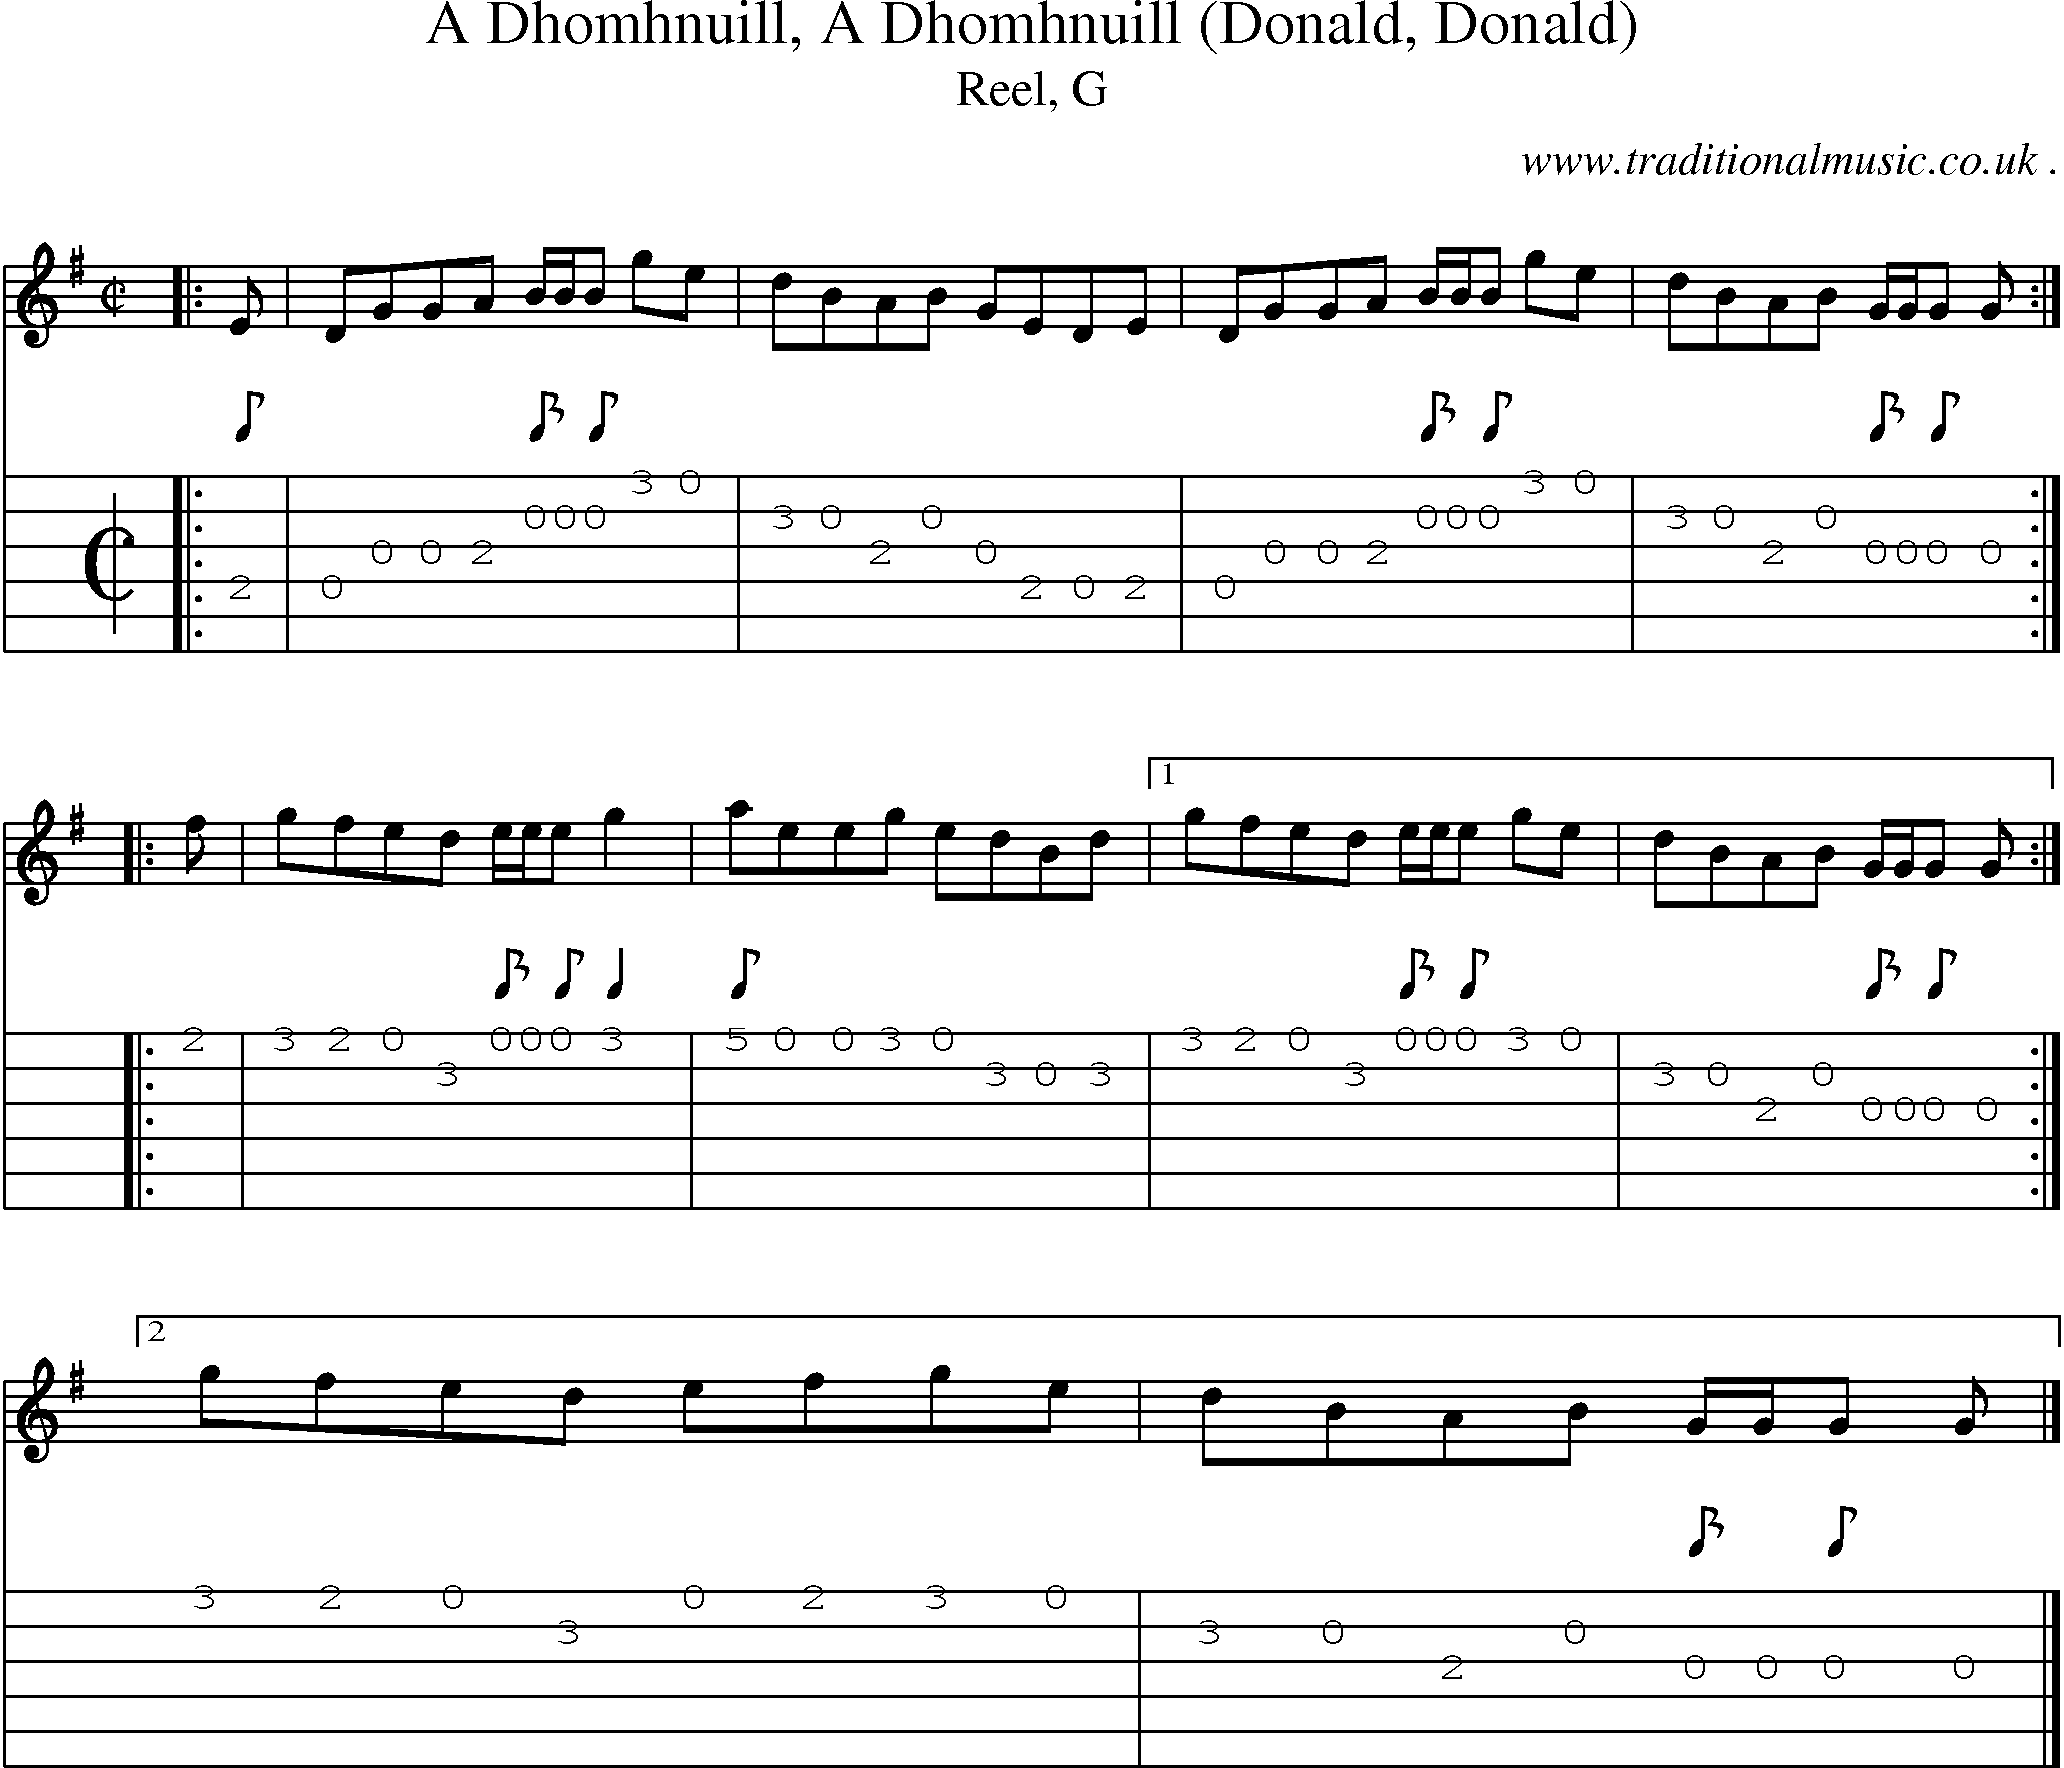 Sheet-music  score, Chords and Guitar Tabs for A Dhomhnuill A Dhomhnuill Donald Donald